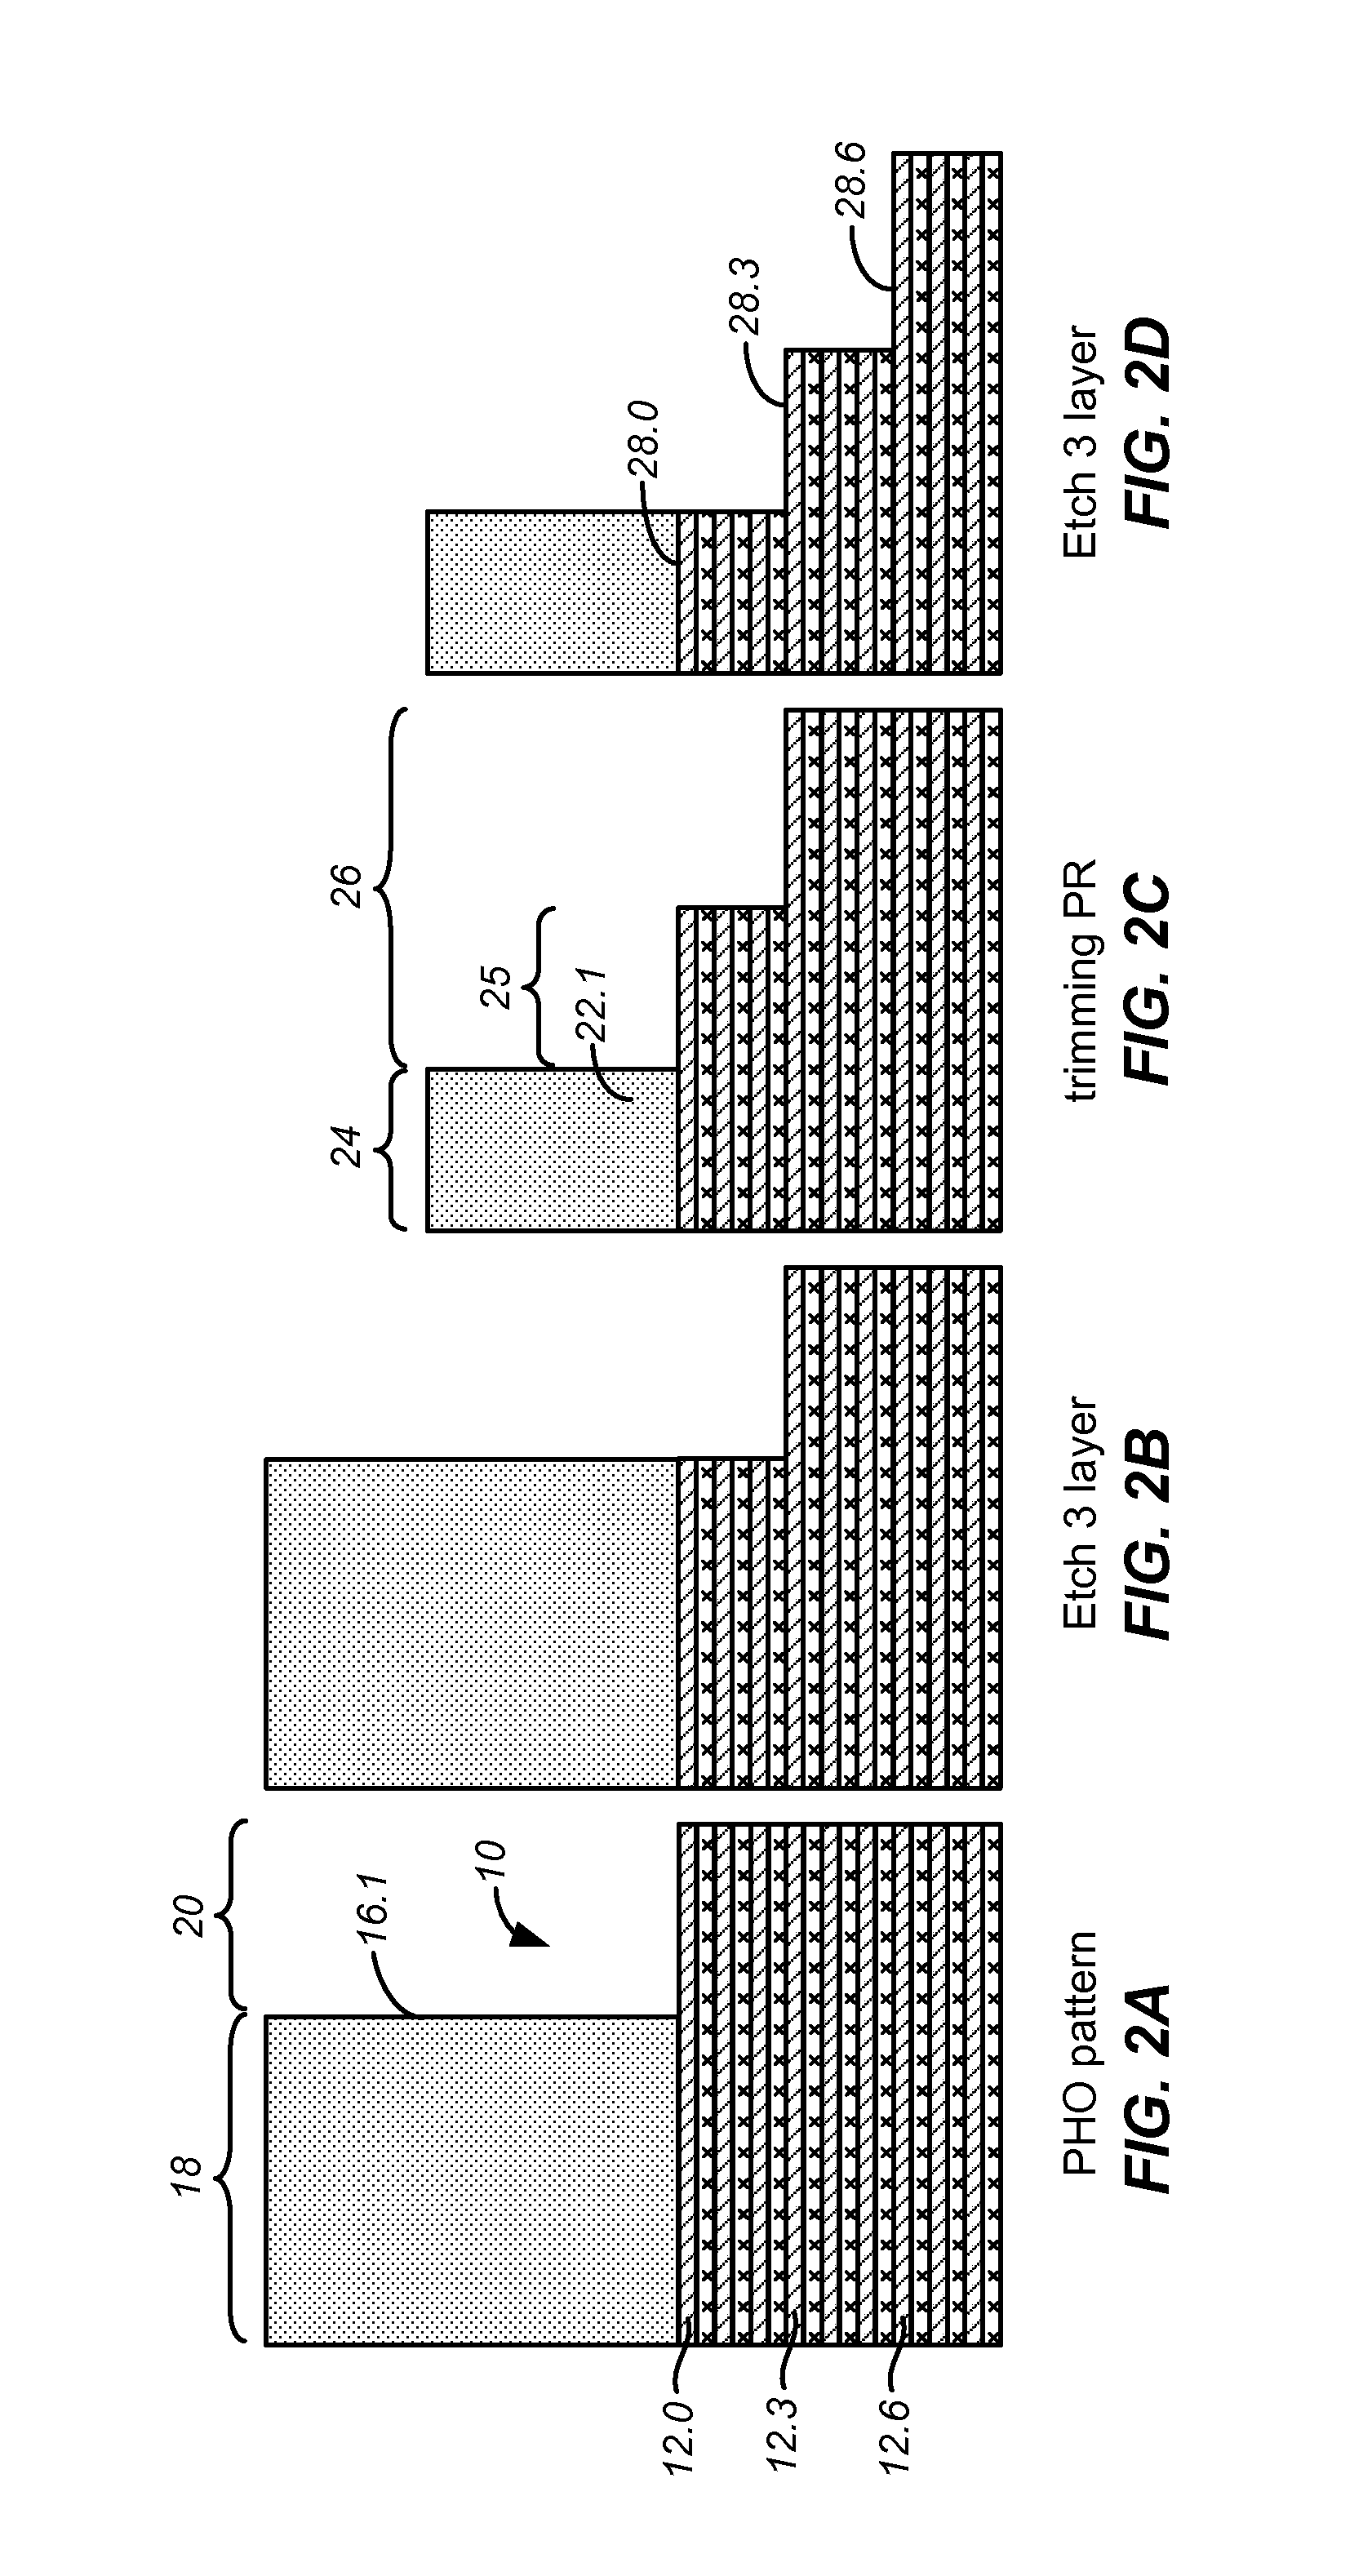 Method for forming interlayer connectors to a stack of conductive layers